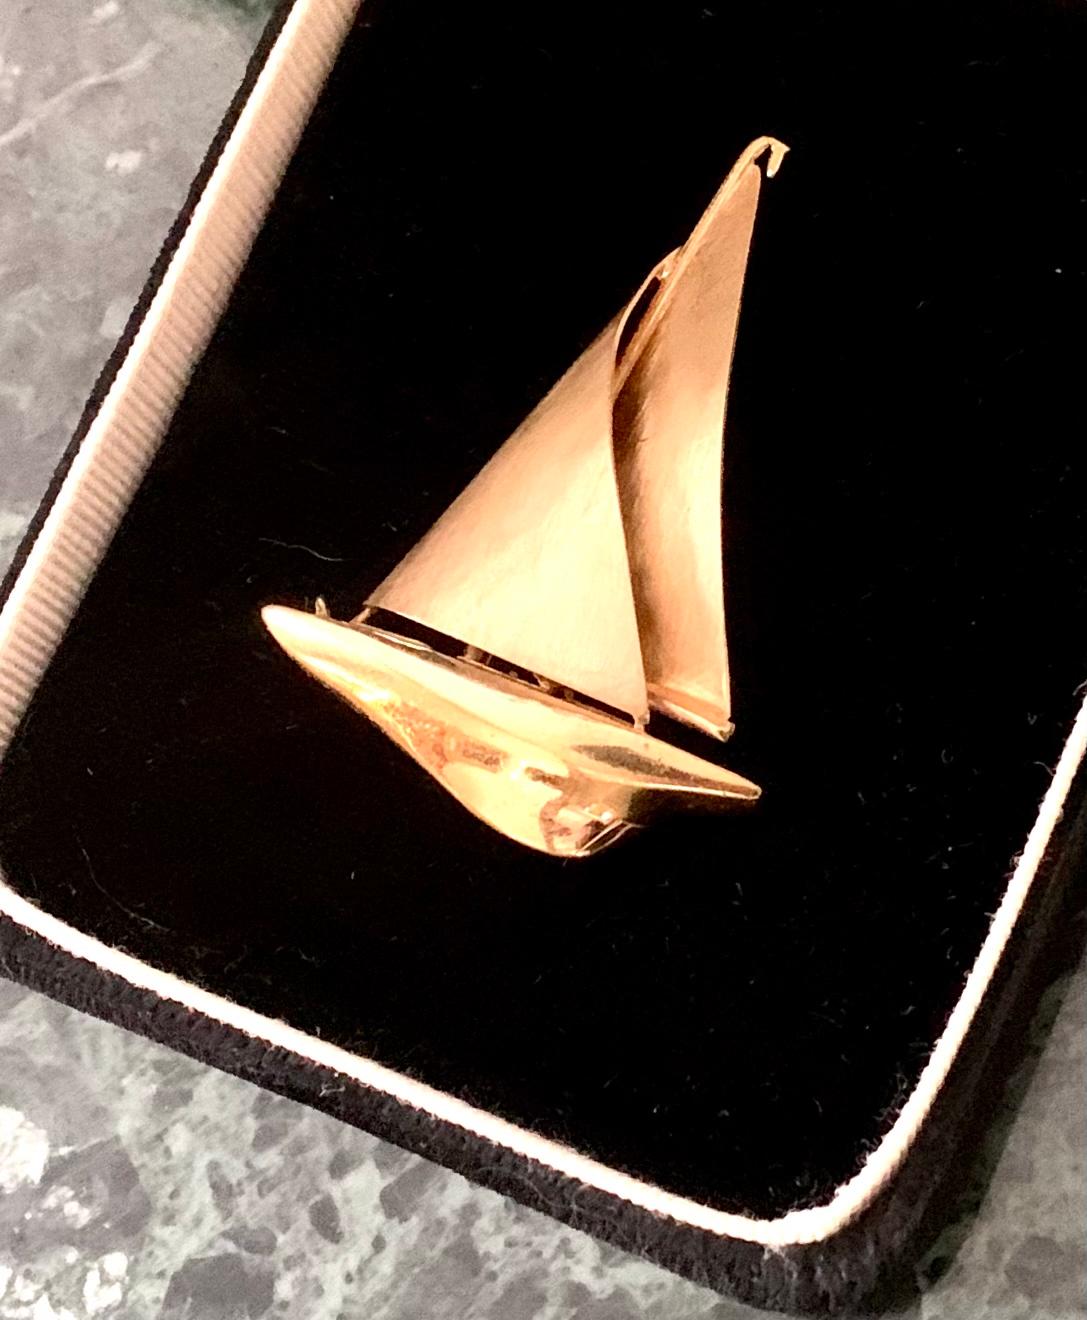 There are some things you can learn best in calm, and some in storm.- Willa Cather
Nautical motifs have inspired some of the greatest minds of our time.

Elegant estate yacht brooch with large textured gold sails and a gleaming body with lovely